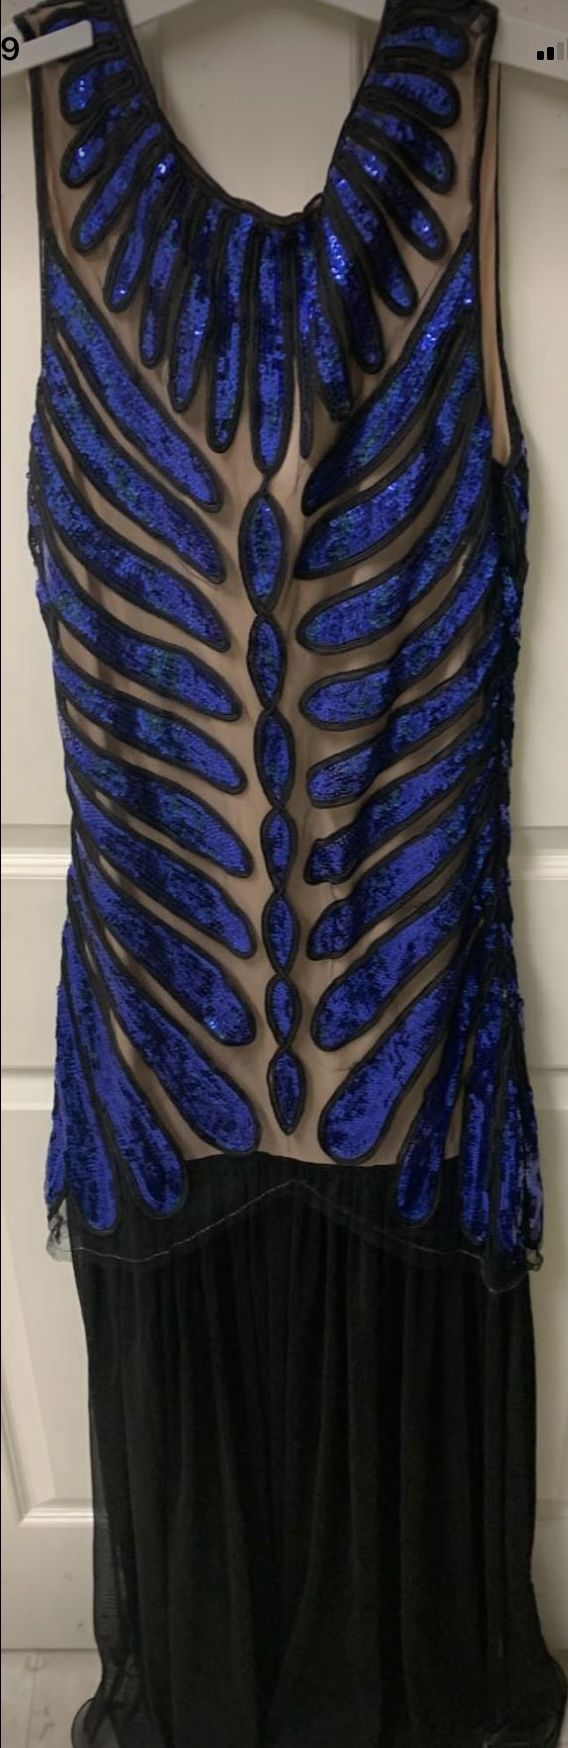 New Black Evening Gown with Royal Blue Sequins And  See Though Black Bottom Size Small 